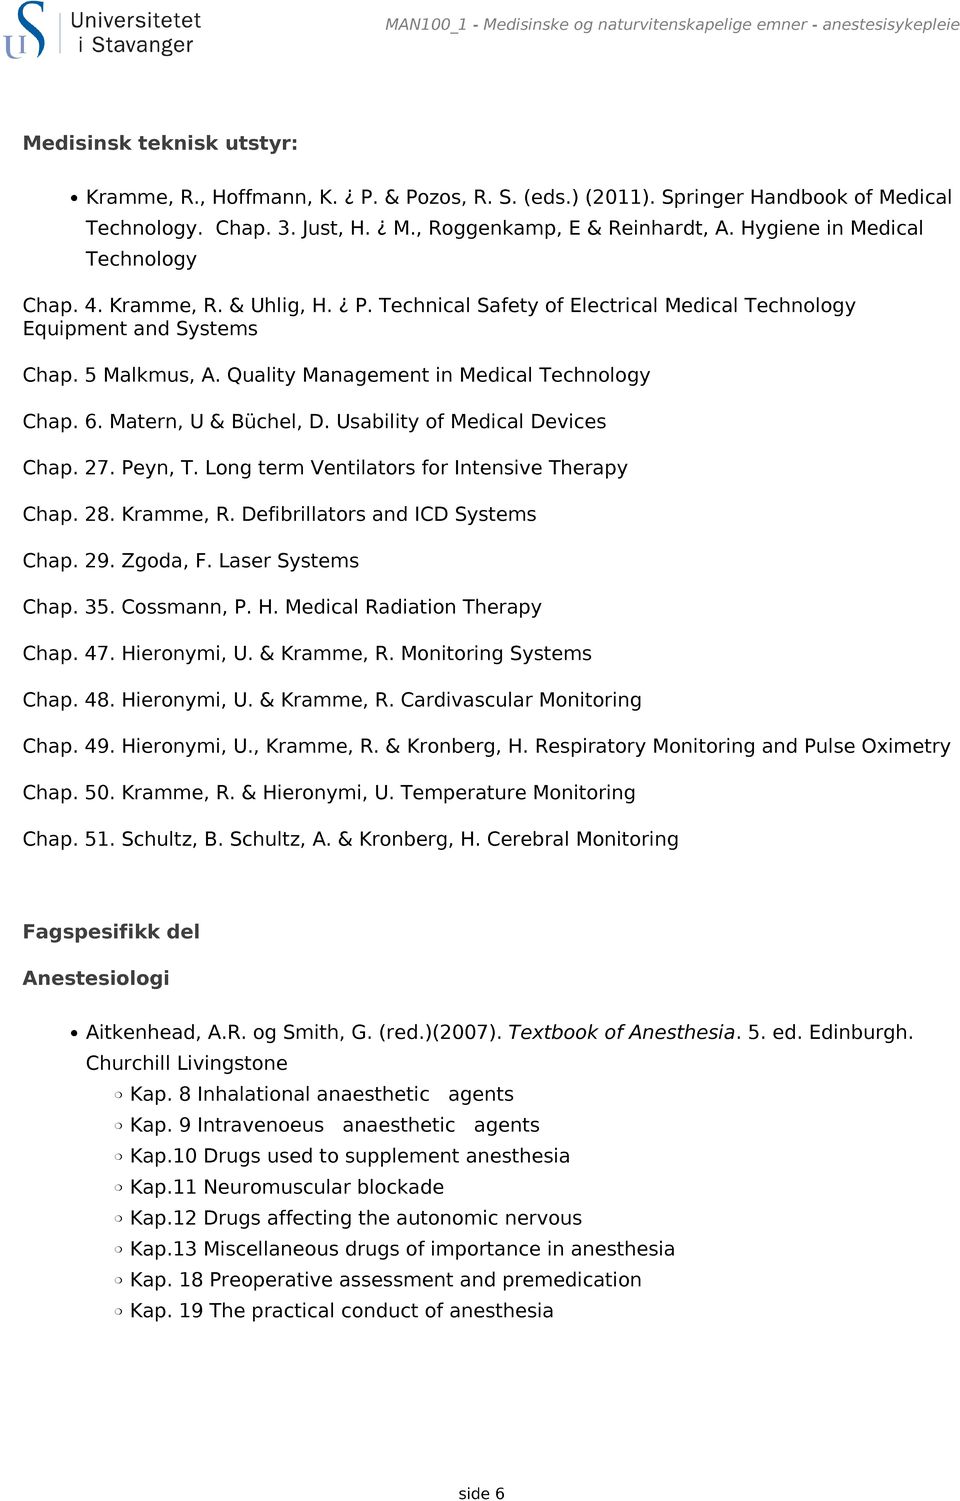 5 Malkmus, A. Quality Management in Medical Technology Chap. 6. Matern, U & Büchel, D. Usability of Medical Devices Chap. 27. Peyn, T. Long term Ventilators for Intensive Therapy Chap. 28. Kramme, R.